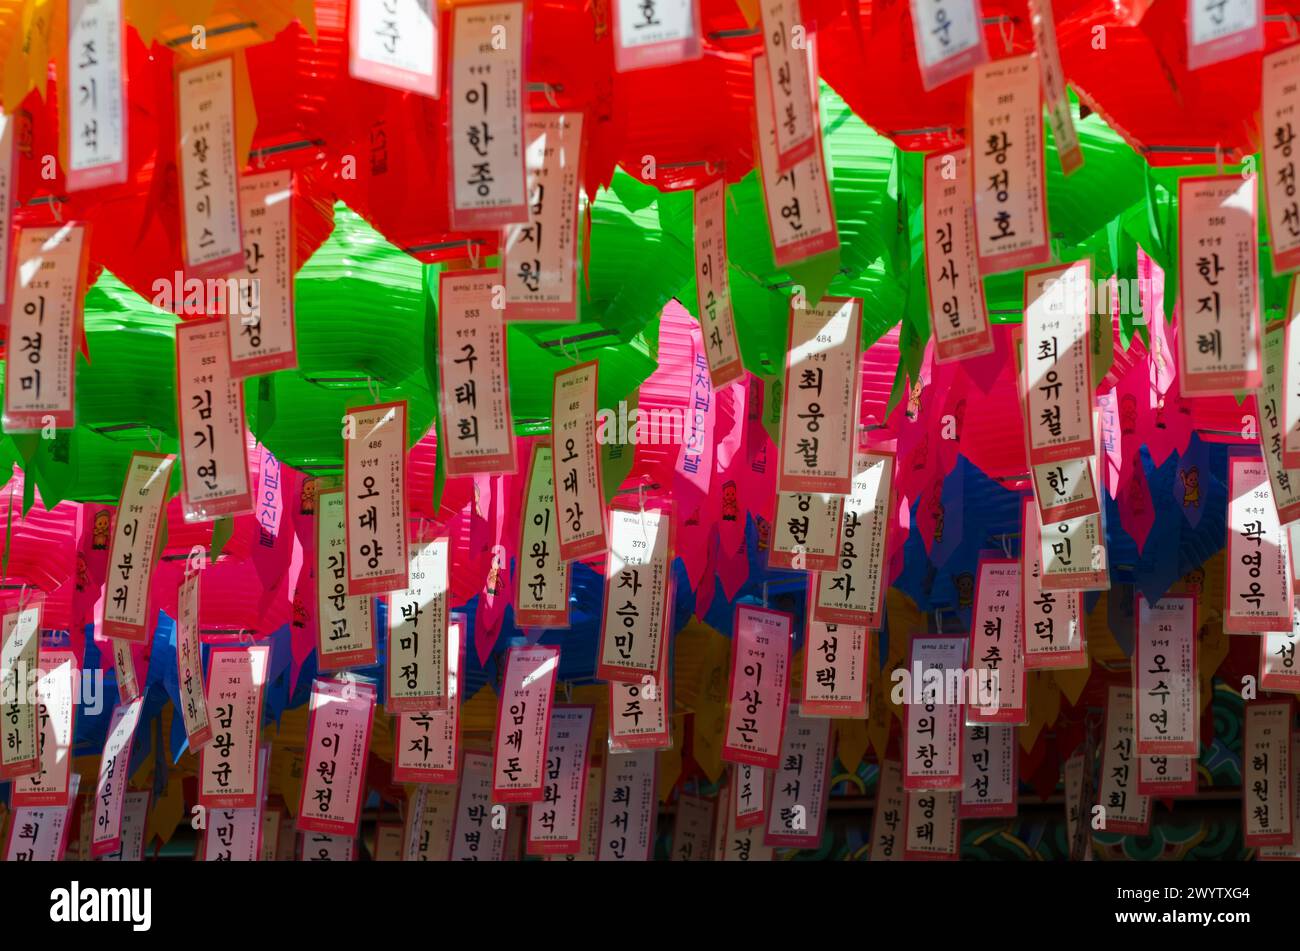 A colorful display of lanterns with Chinese writing on them. The lanterns are hanging from the ceiling and are of various colors Stock Photo